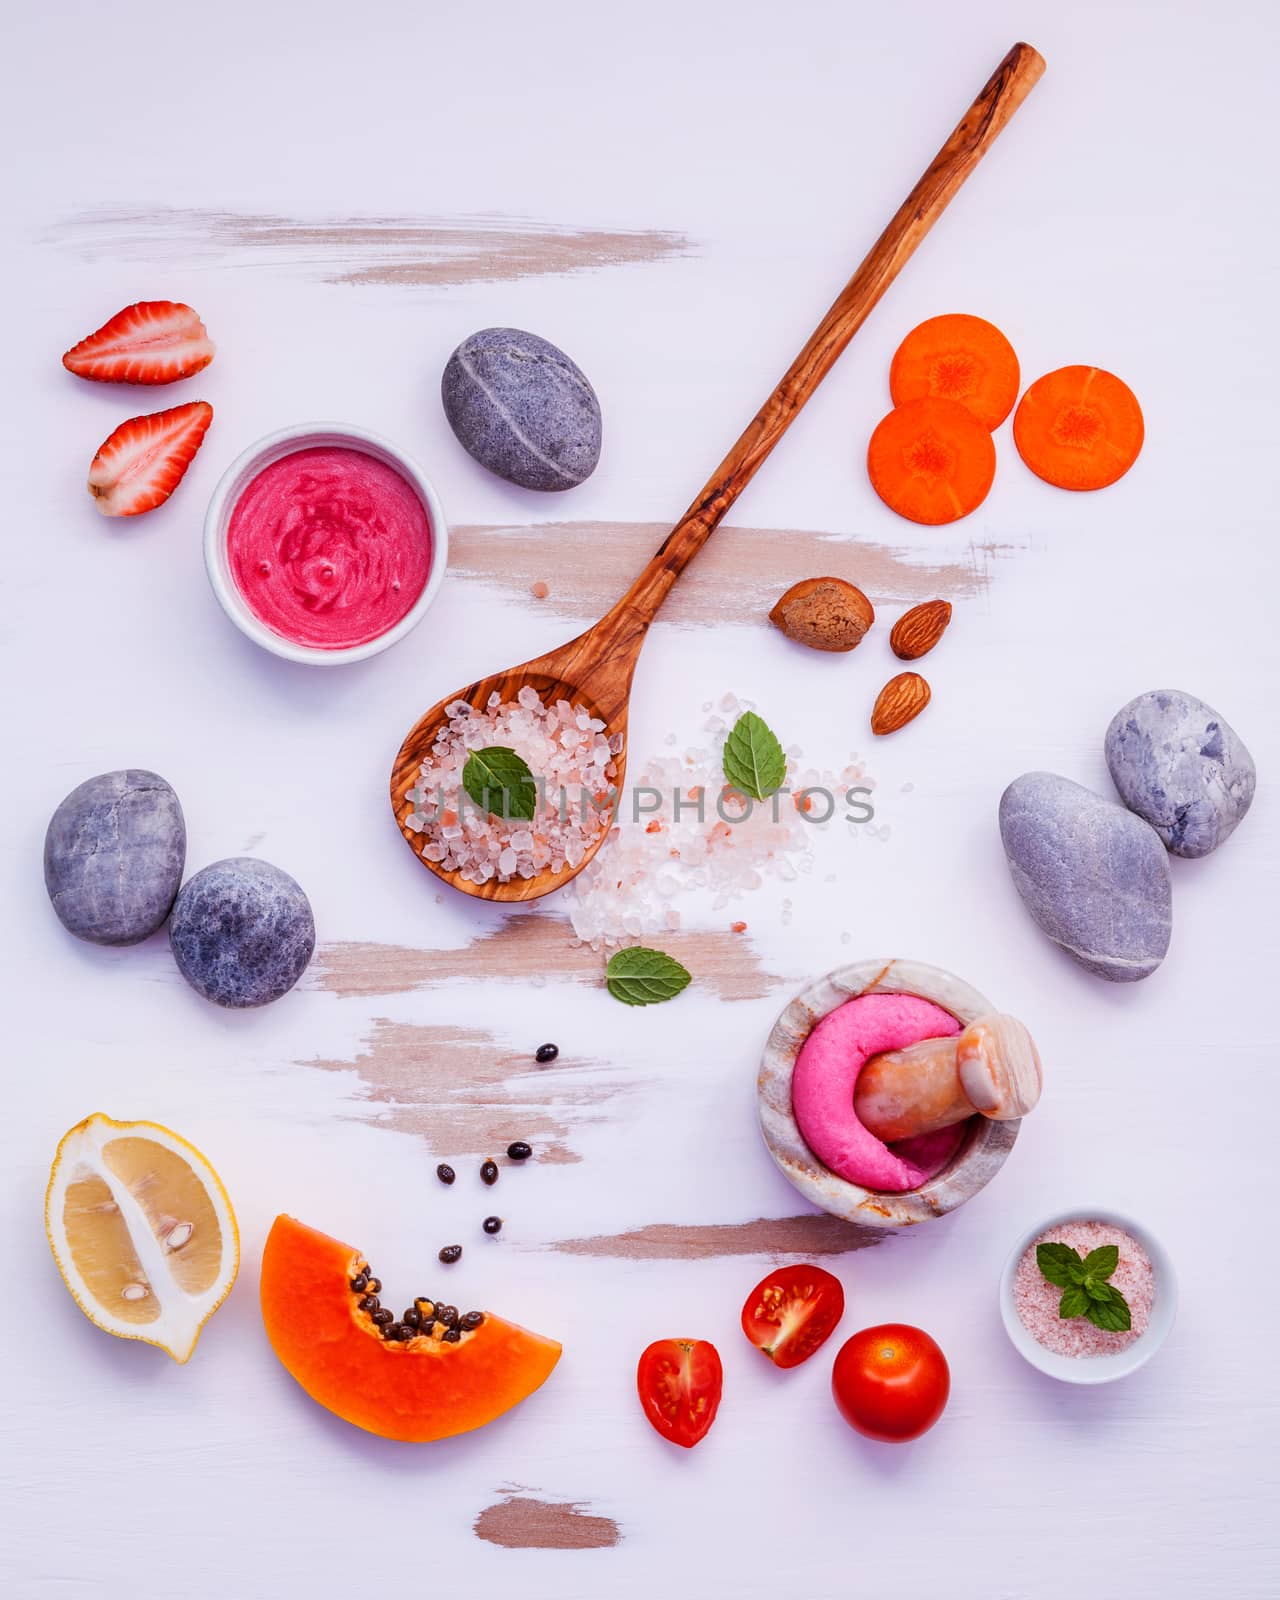 Homemade skin care and body scrubs with red natural ingredients strawberry ,tomato ,himalayan salt, papaya, carrot and spa stone setup on white wooden background .Zen spa and oriental spa theme.